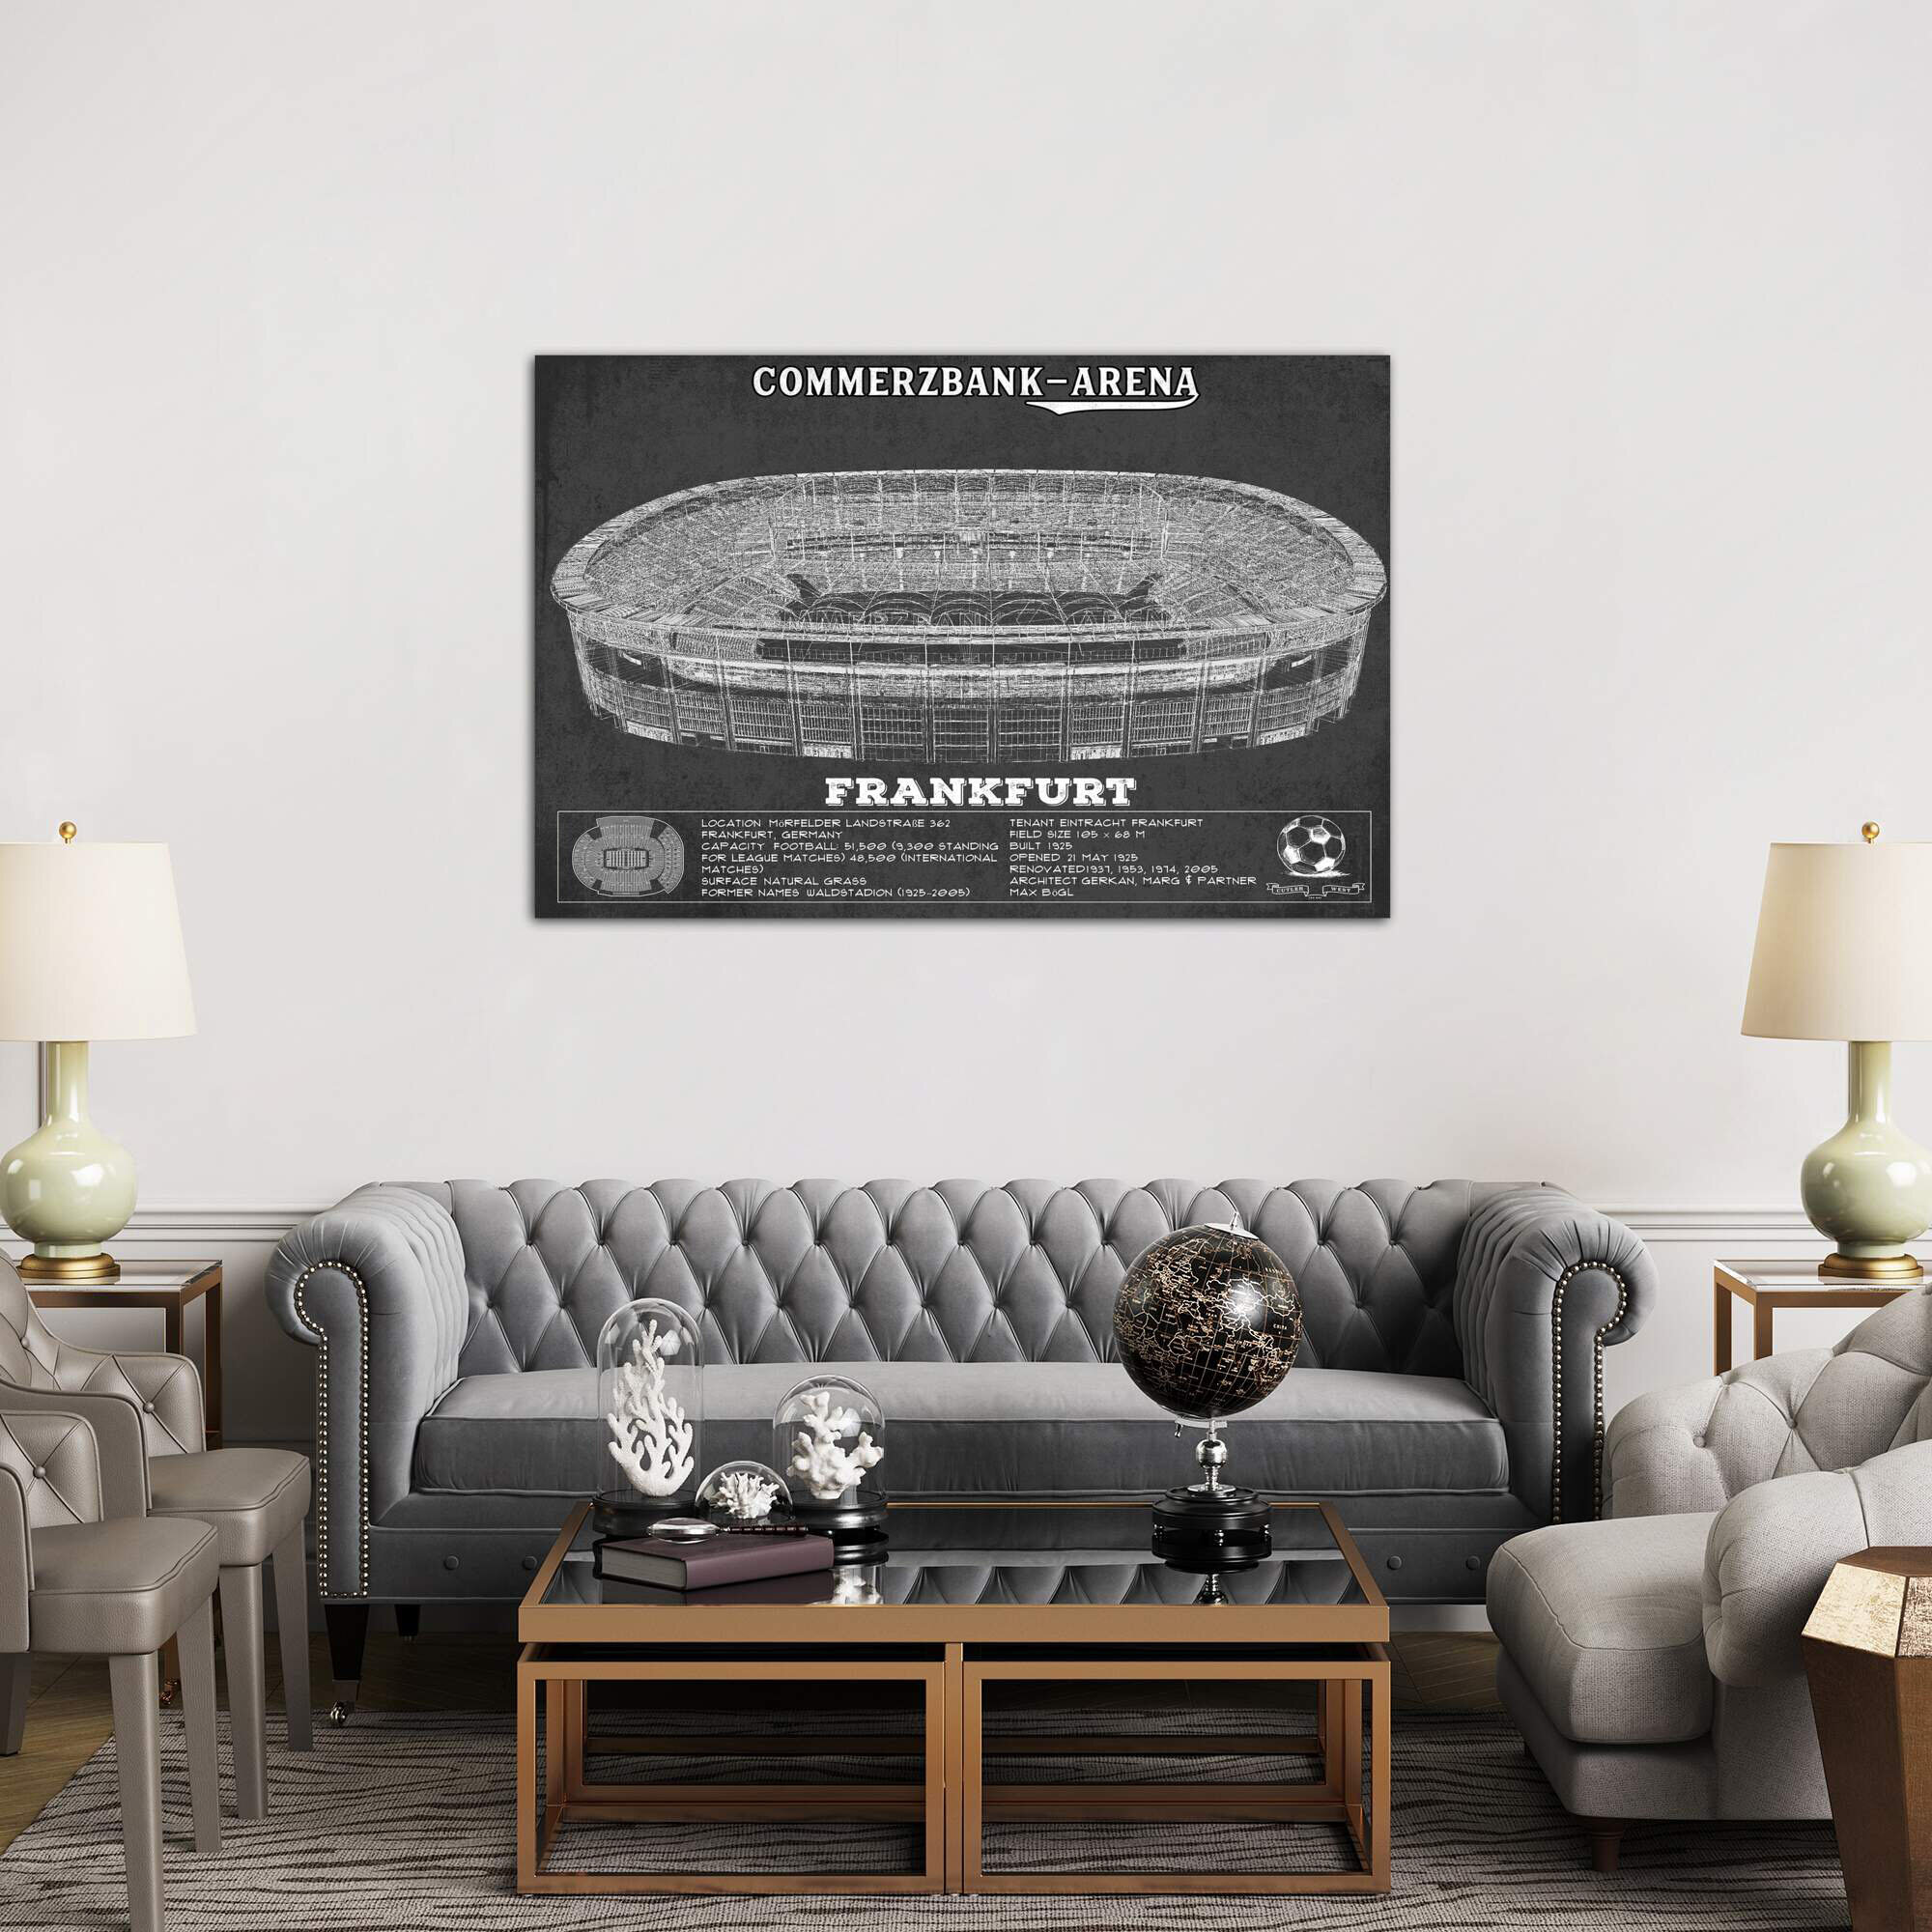 Eintracht Frankfurt Commerzbank Arena Canvas Wall Art Premium Decoration POSTER or CANVAS READY to Hang Canvas High Quality Wall Decor